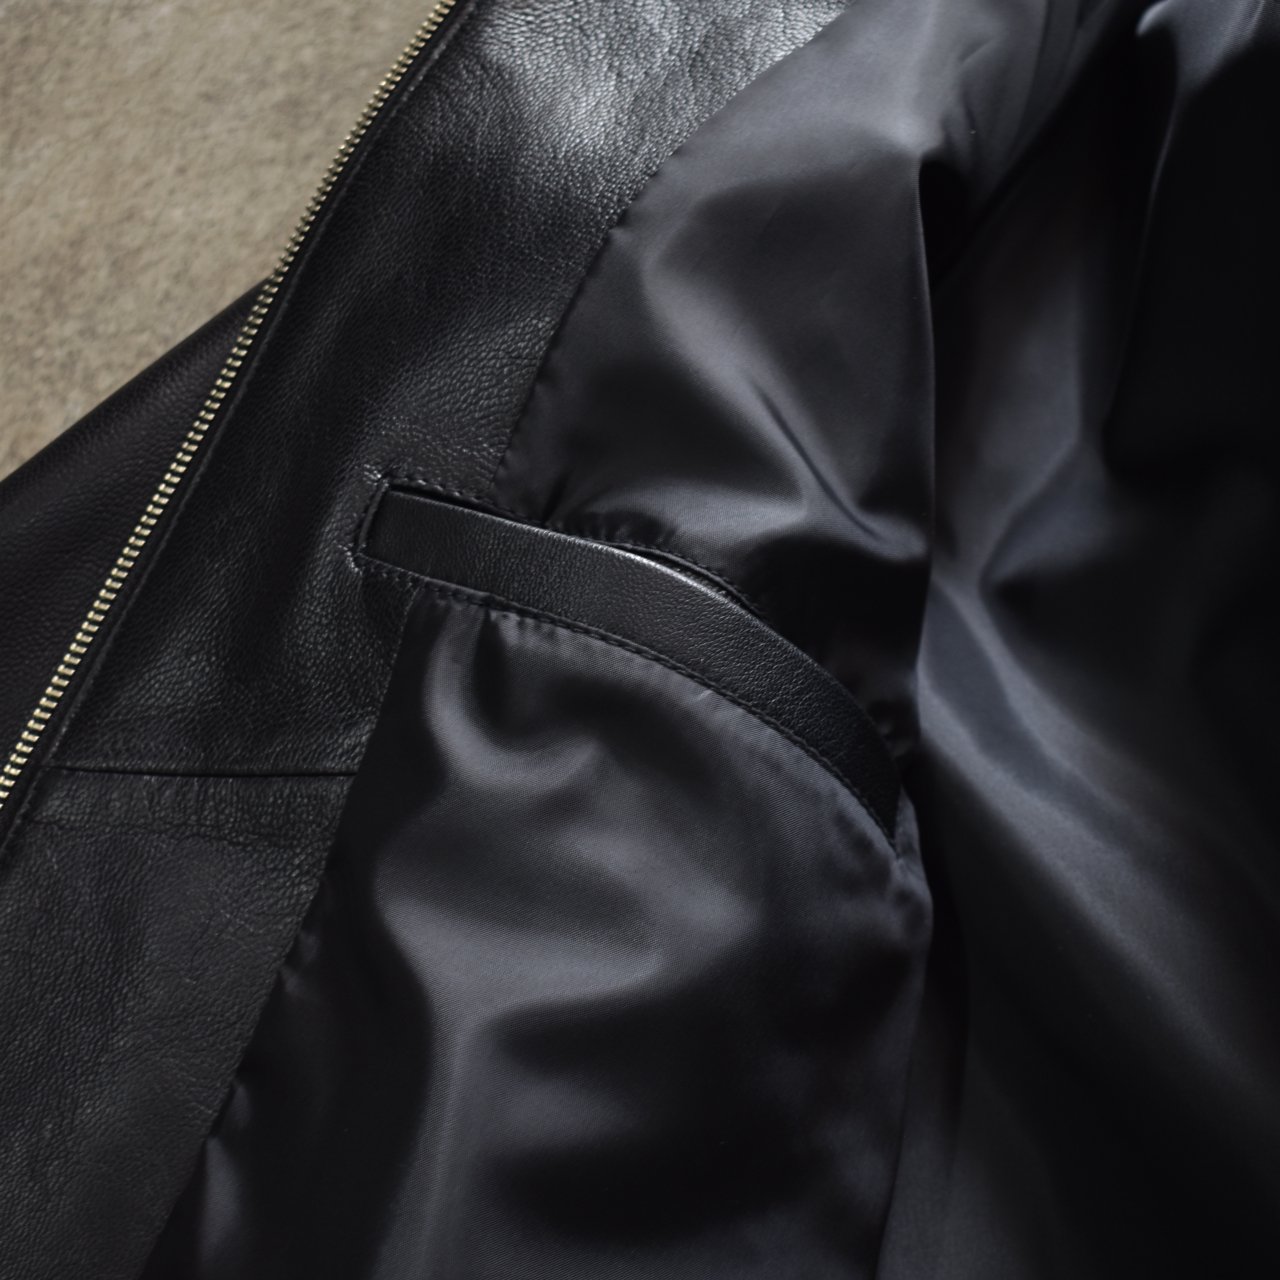 UNIVERSAL PRODUCTS. (ユニバーサルプロダクツ) 24SS/春夏
GOATLEATHER DRIZZLER JACKET BLACK